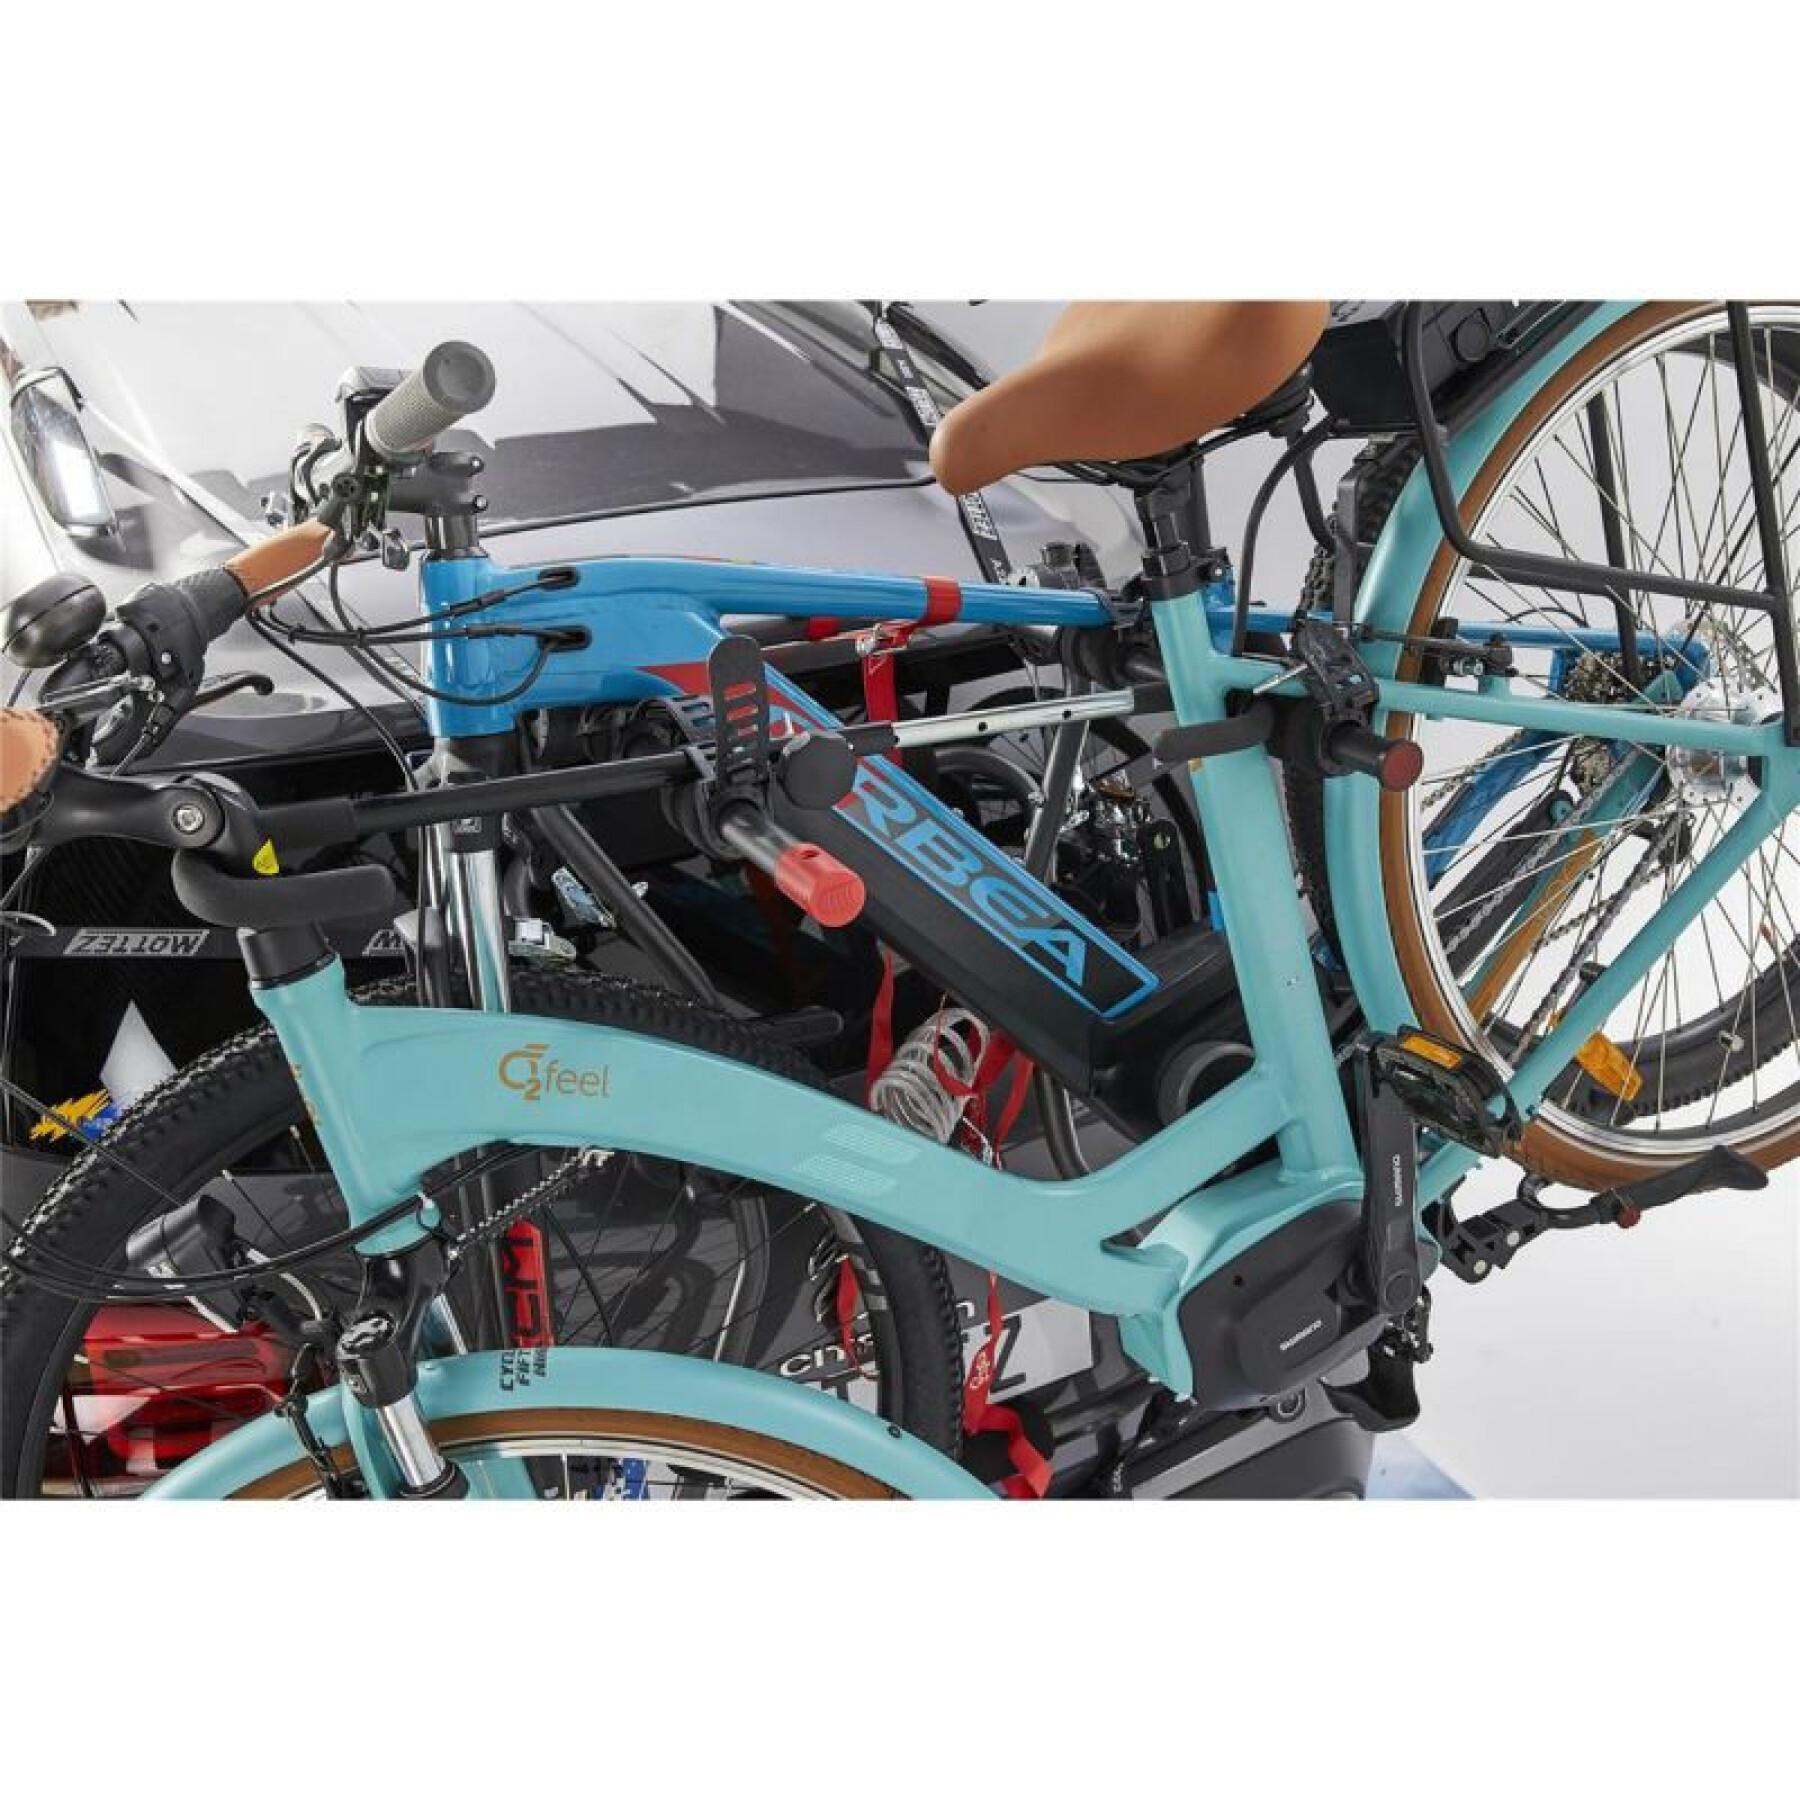 Bike carrier for 2 bikes with space for anti-theft device - homologated for 2 bikes - remember to remove the battery Mottez shiva-2